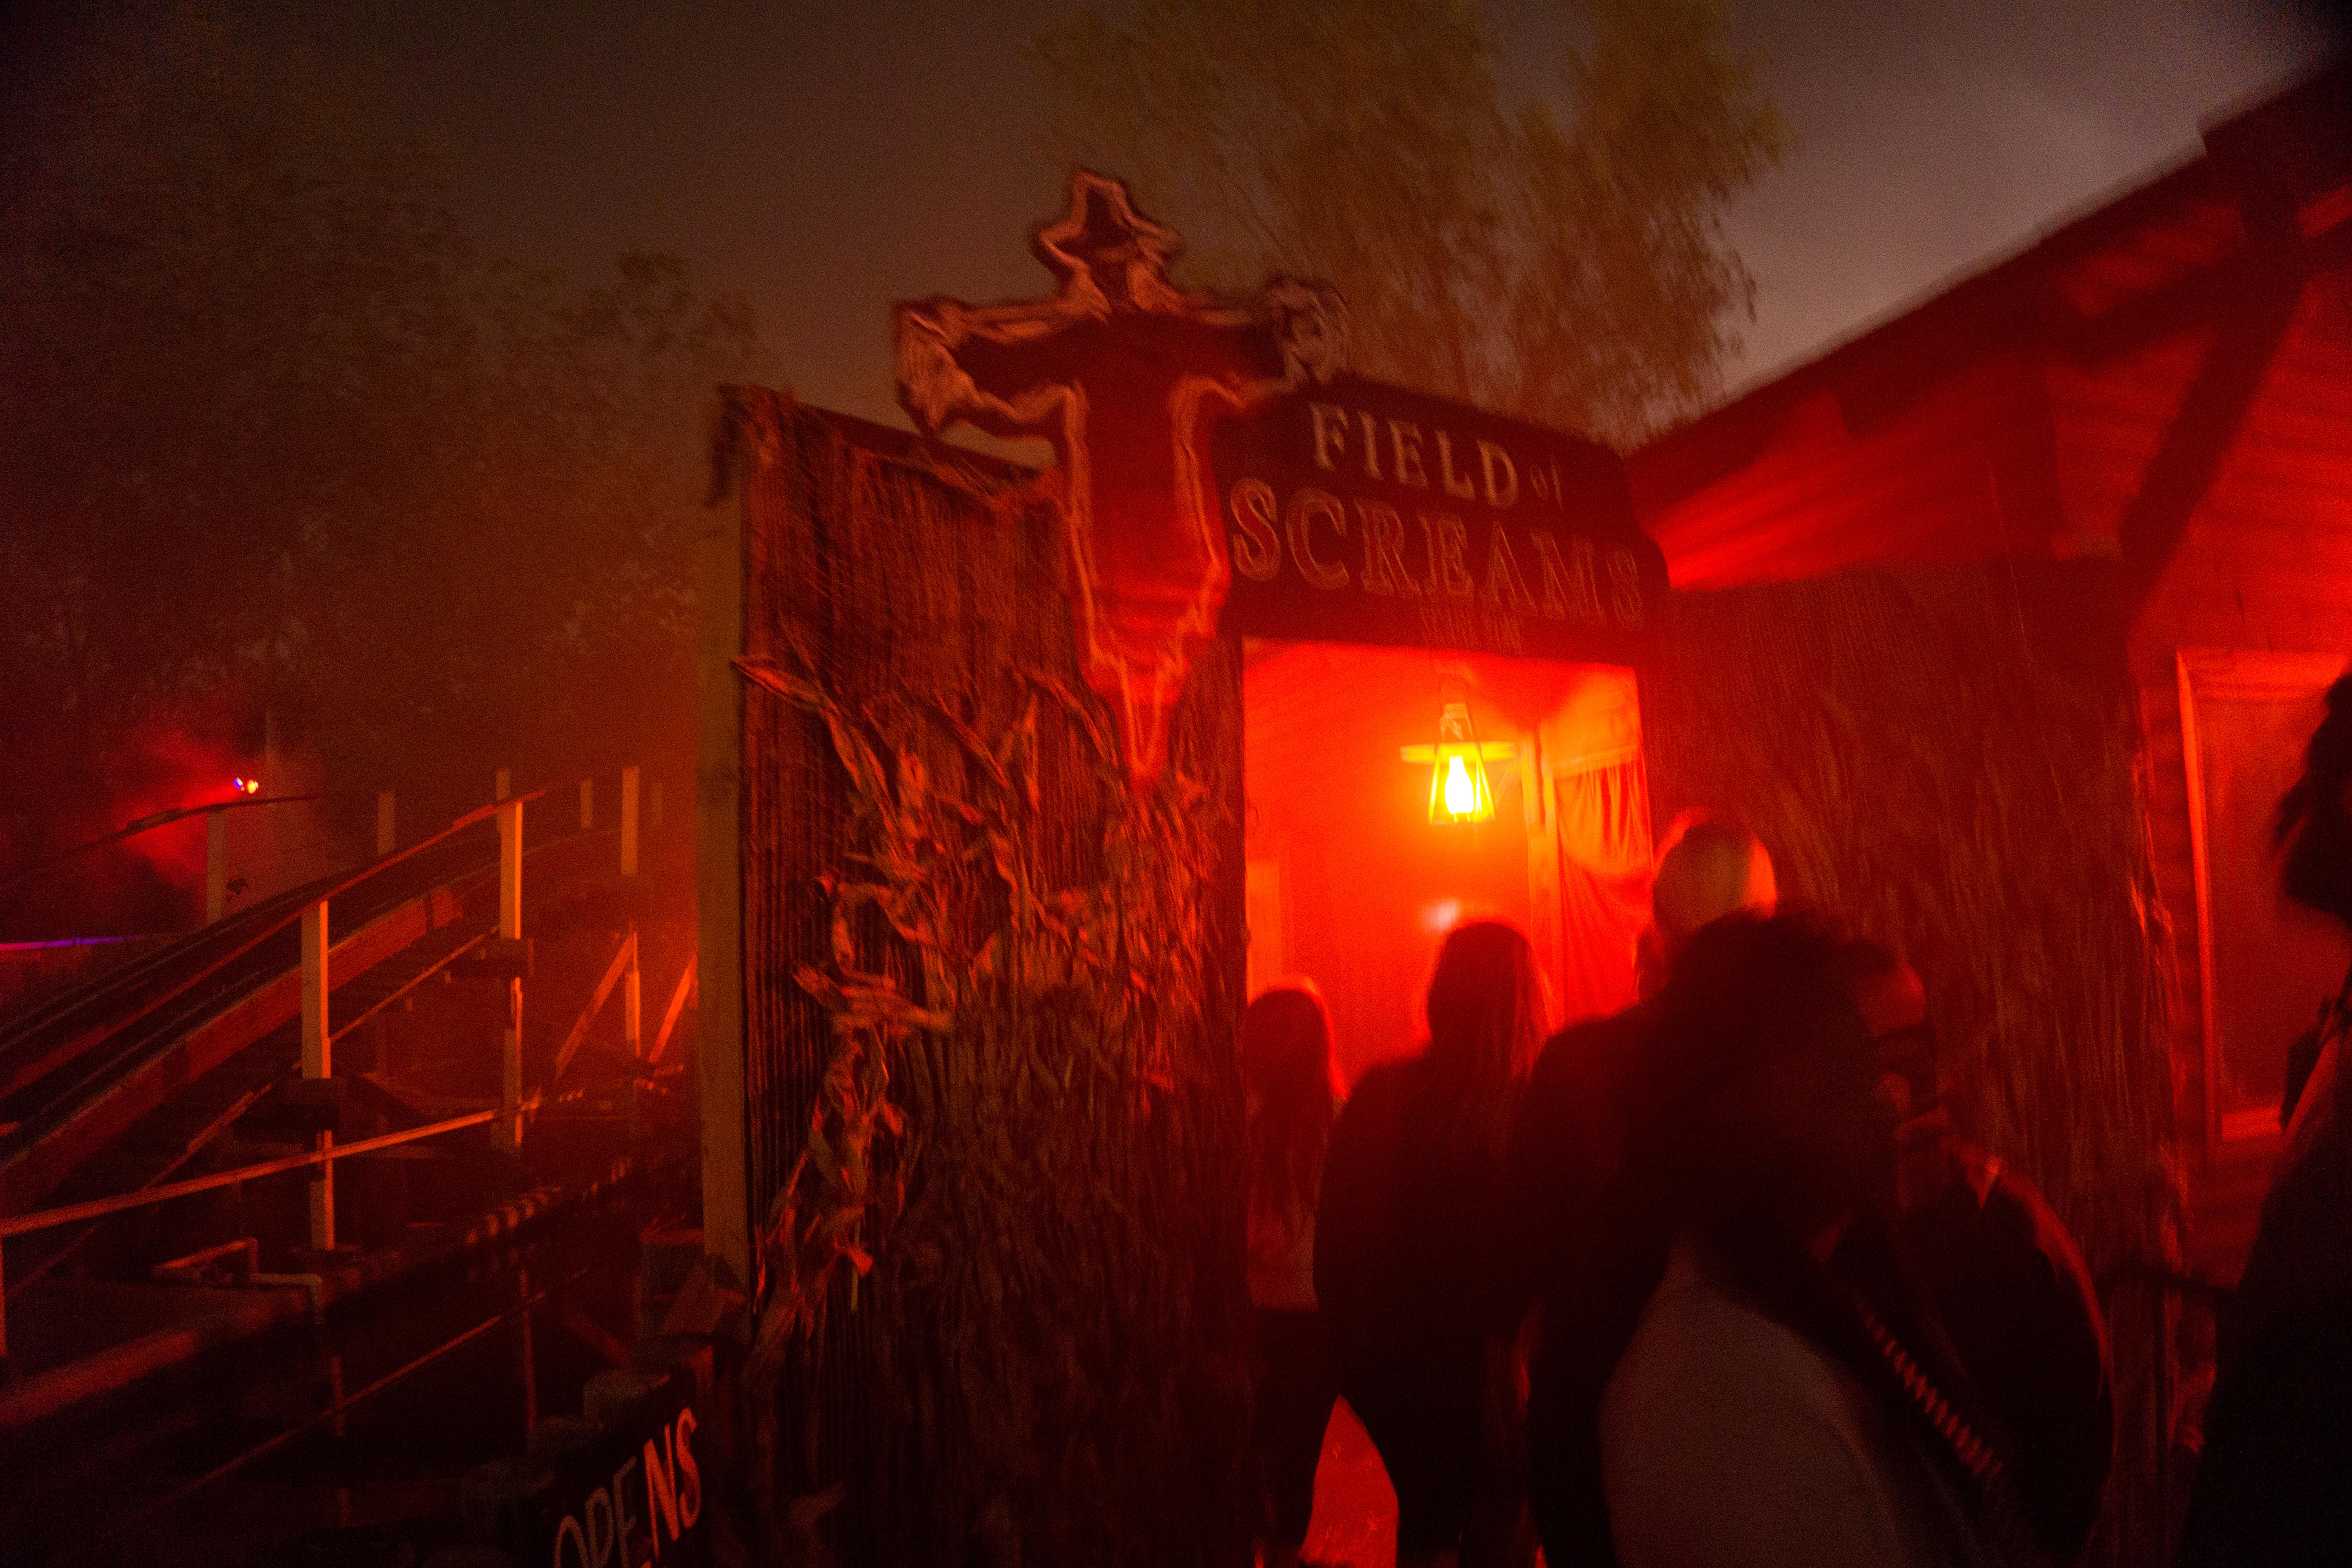 The entrance to Field of Screams